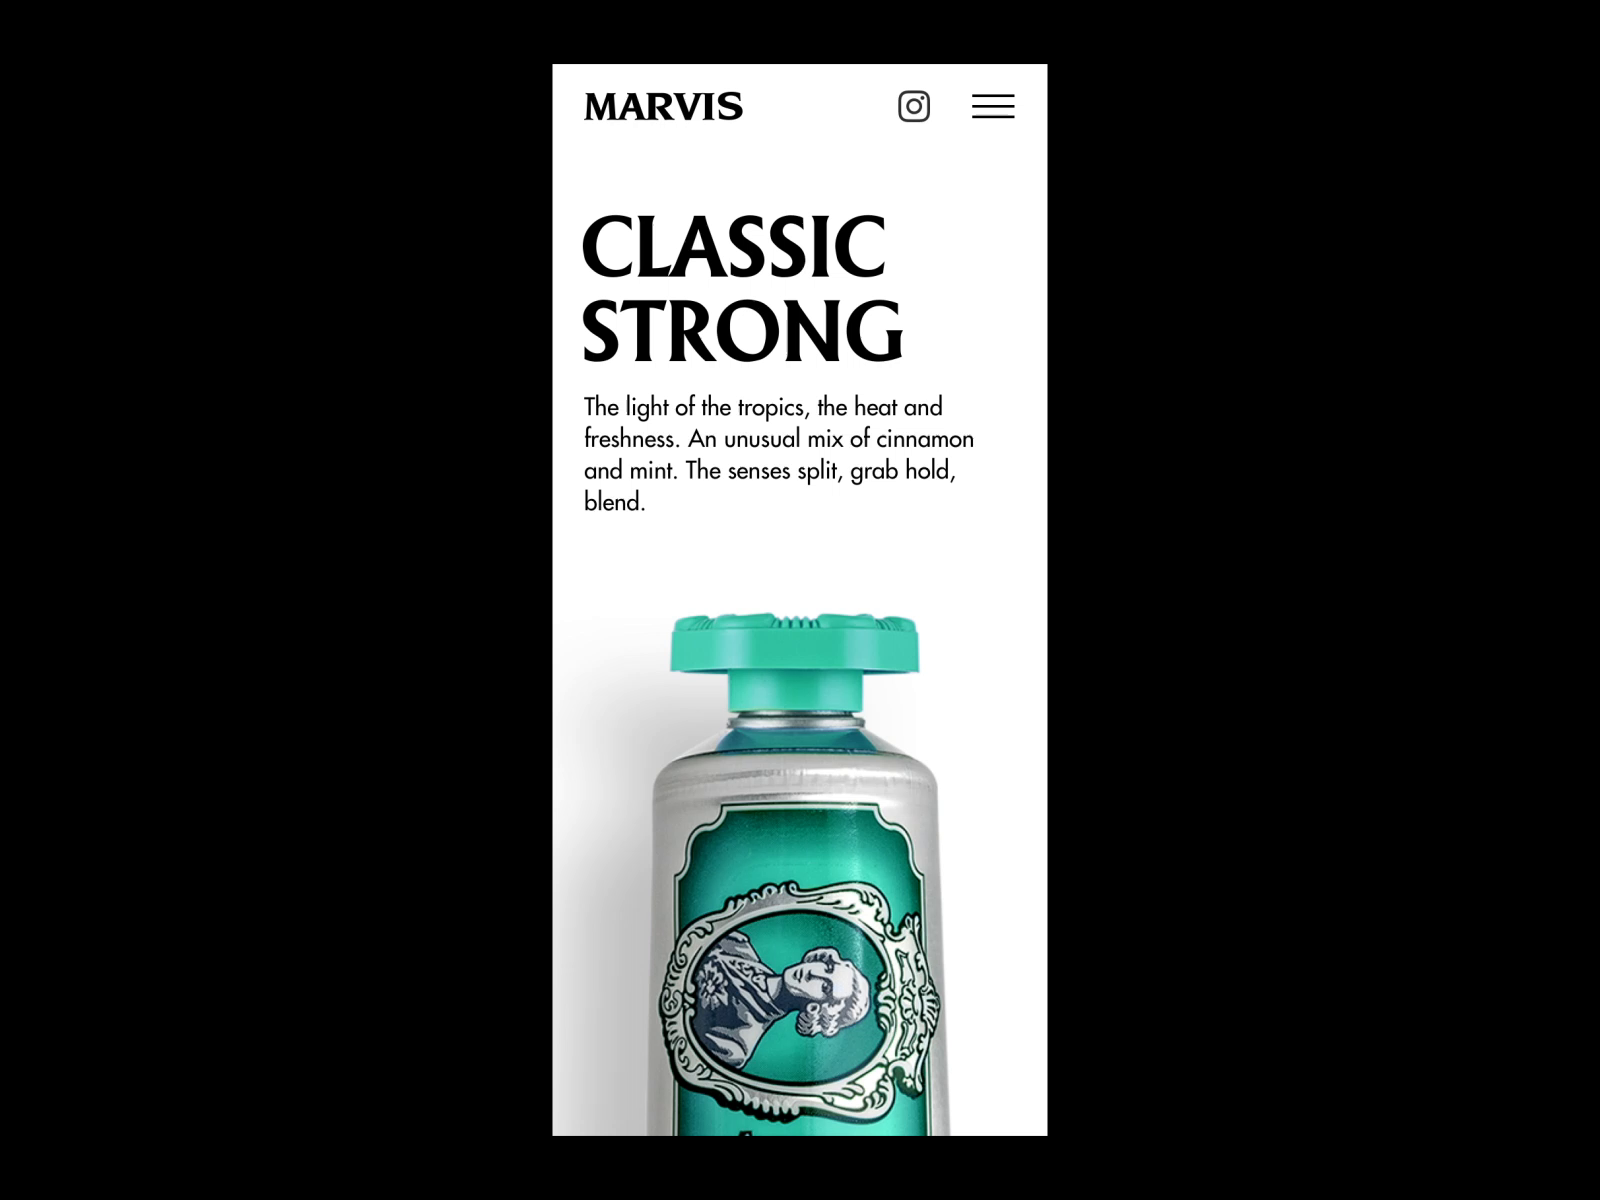 Marvis Product Page